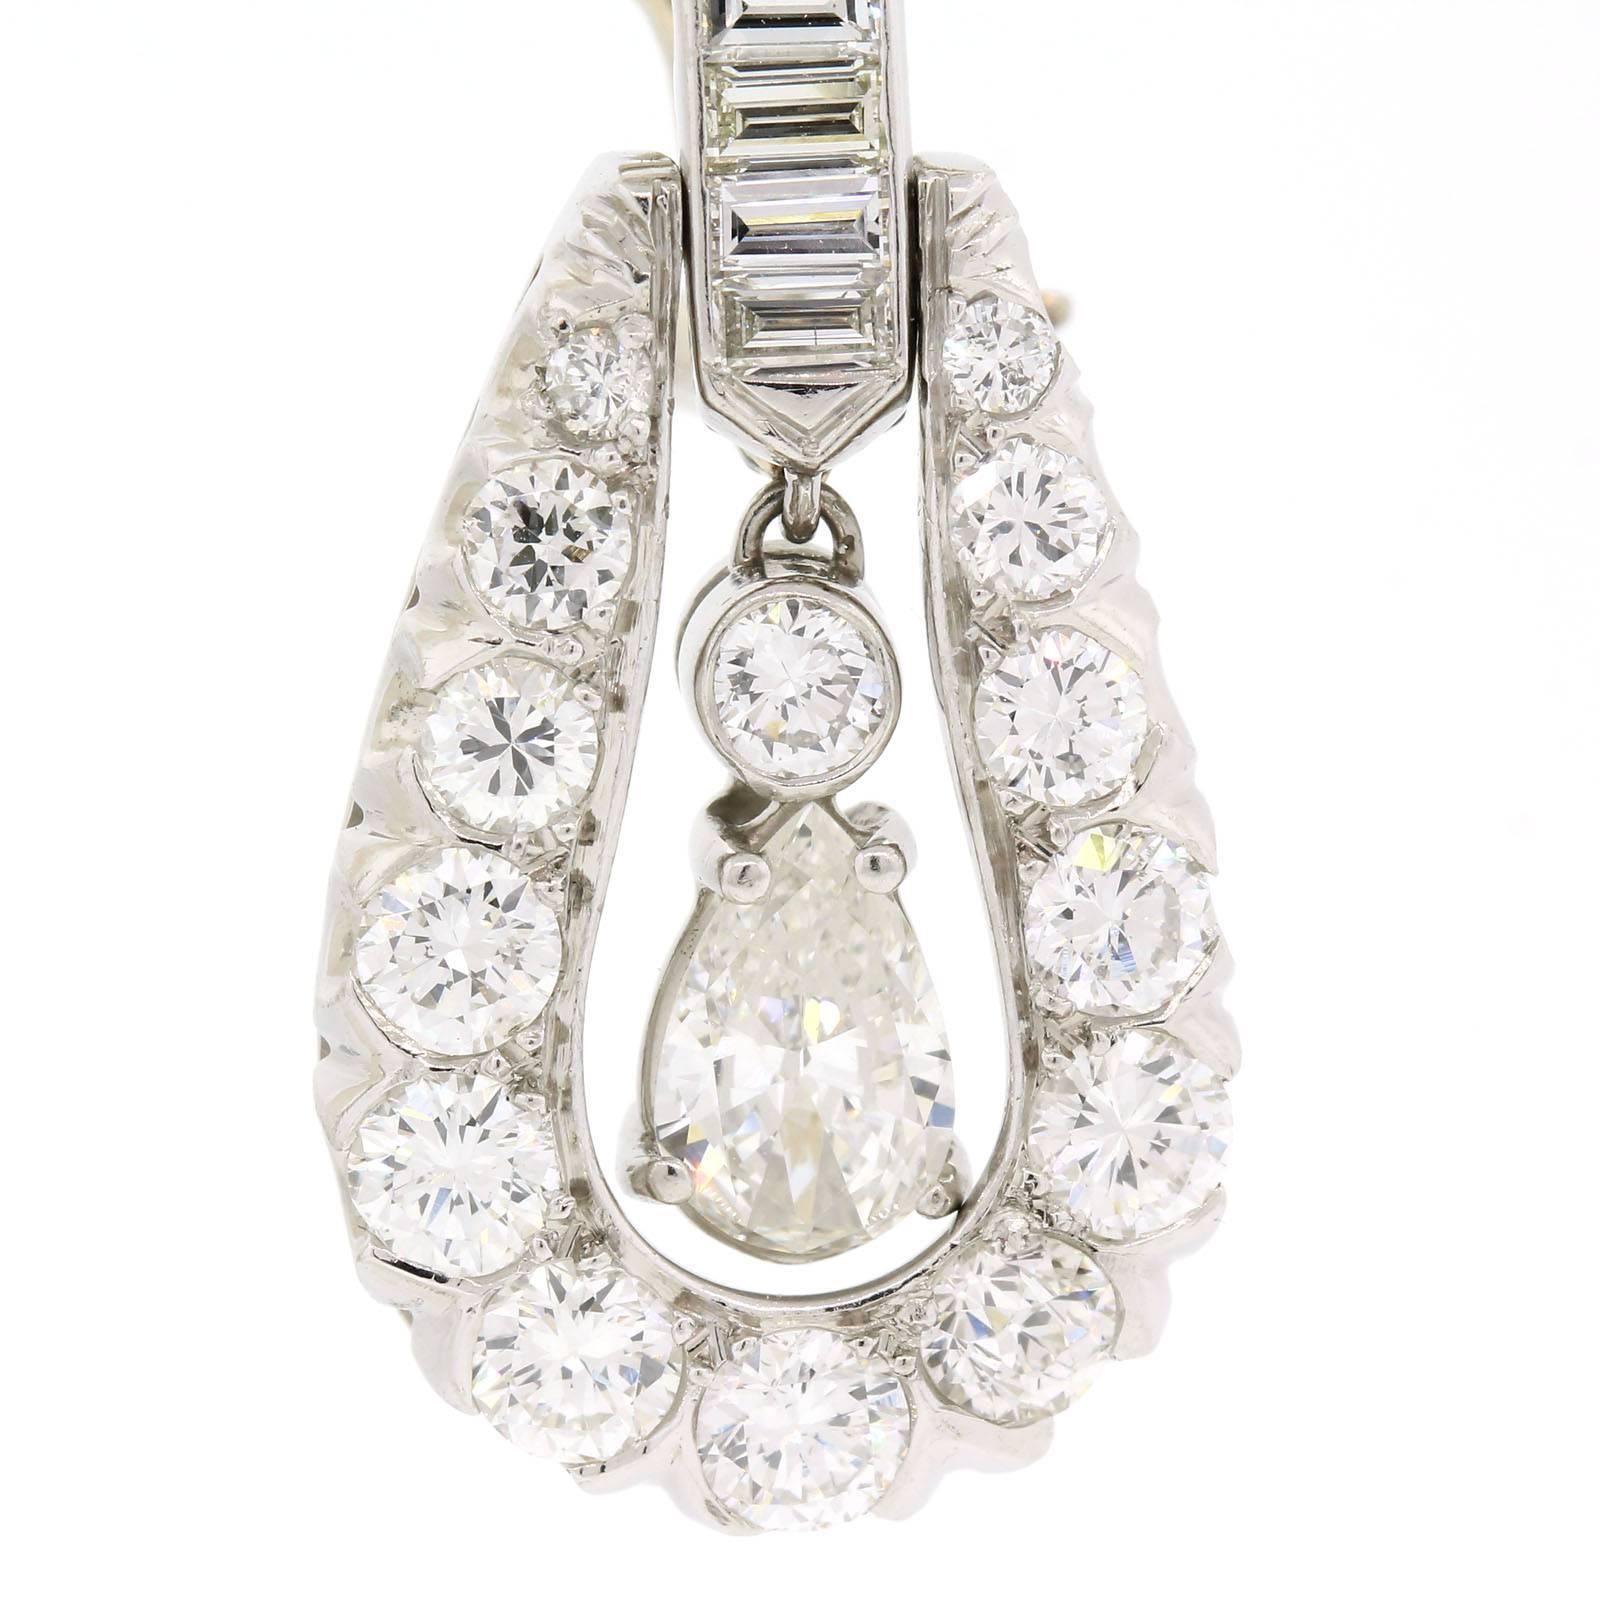 Brilliant 1960s platinum articulated diamond earrings, featuring a dangling Pear shape Diamond.  The stylized 